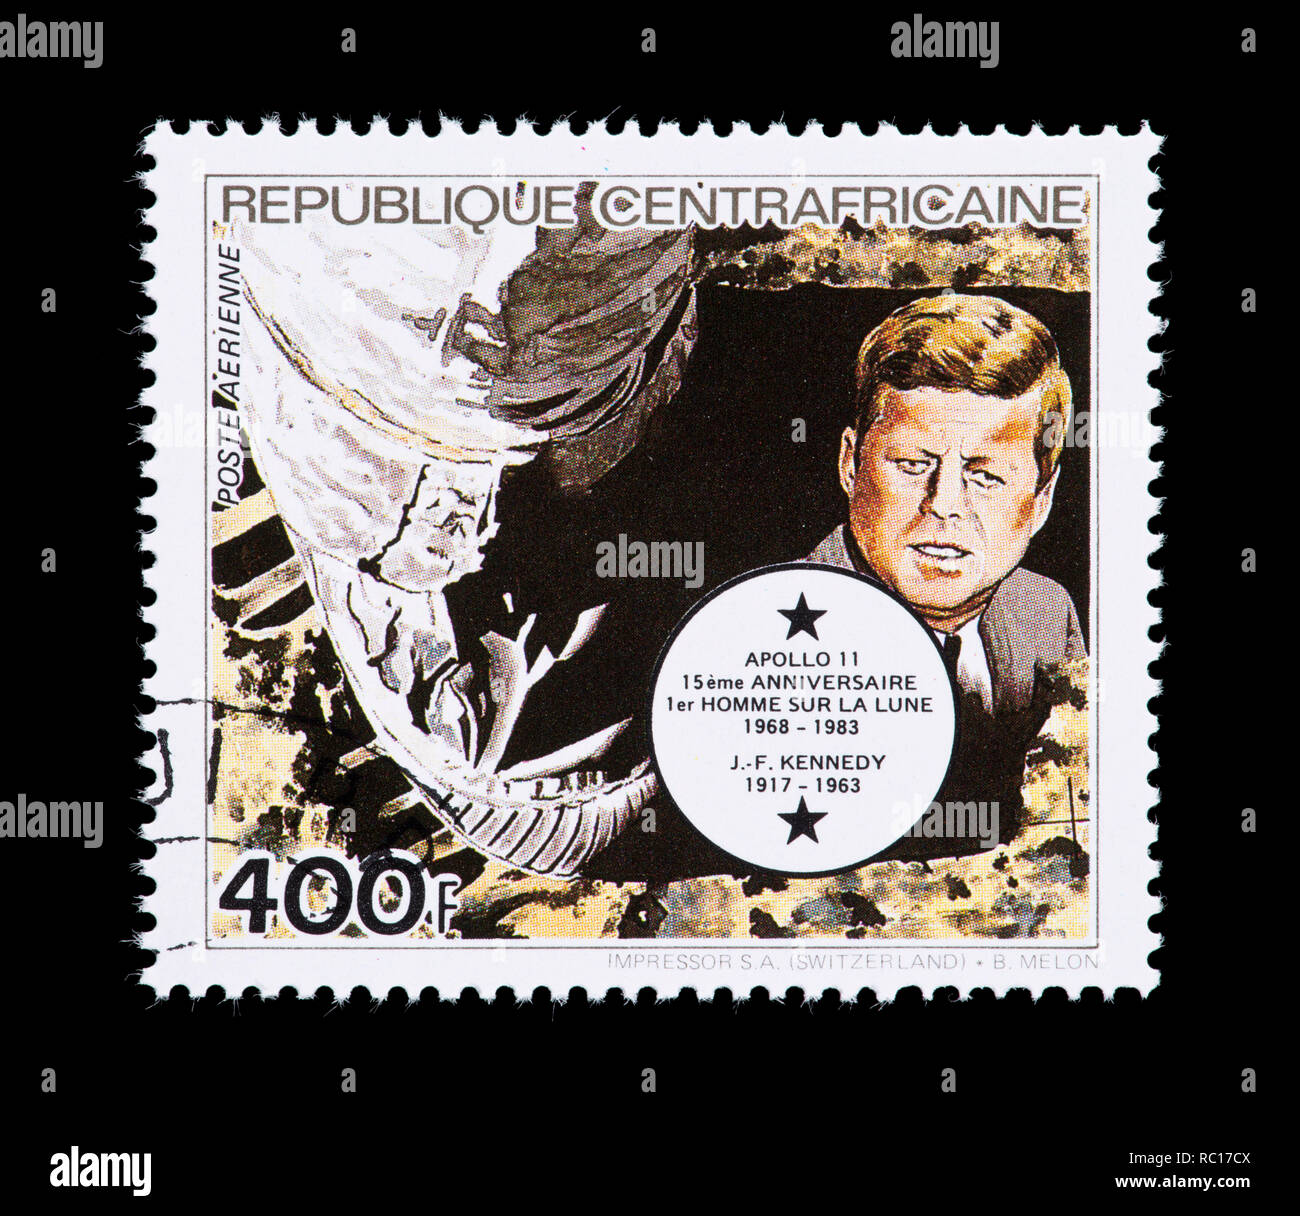 Postage stamp from the Central African Republic depicting John F. Kennedy Stock Photo